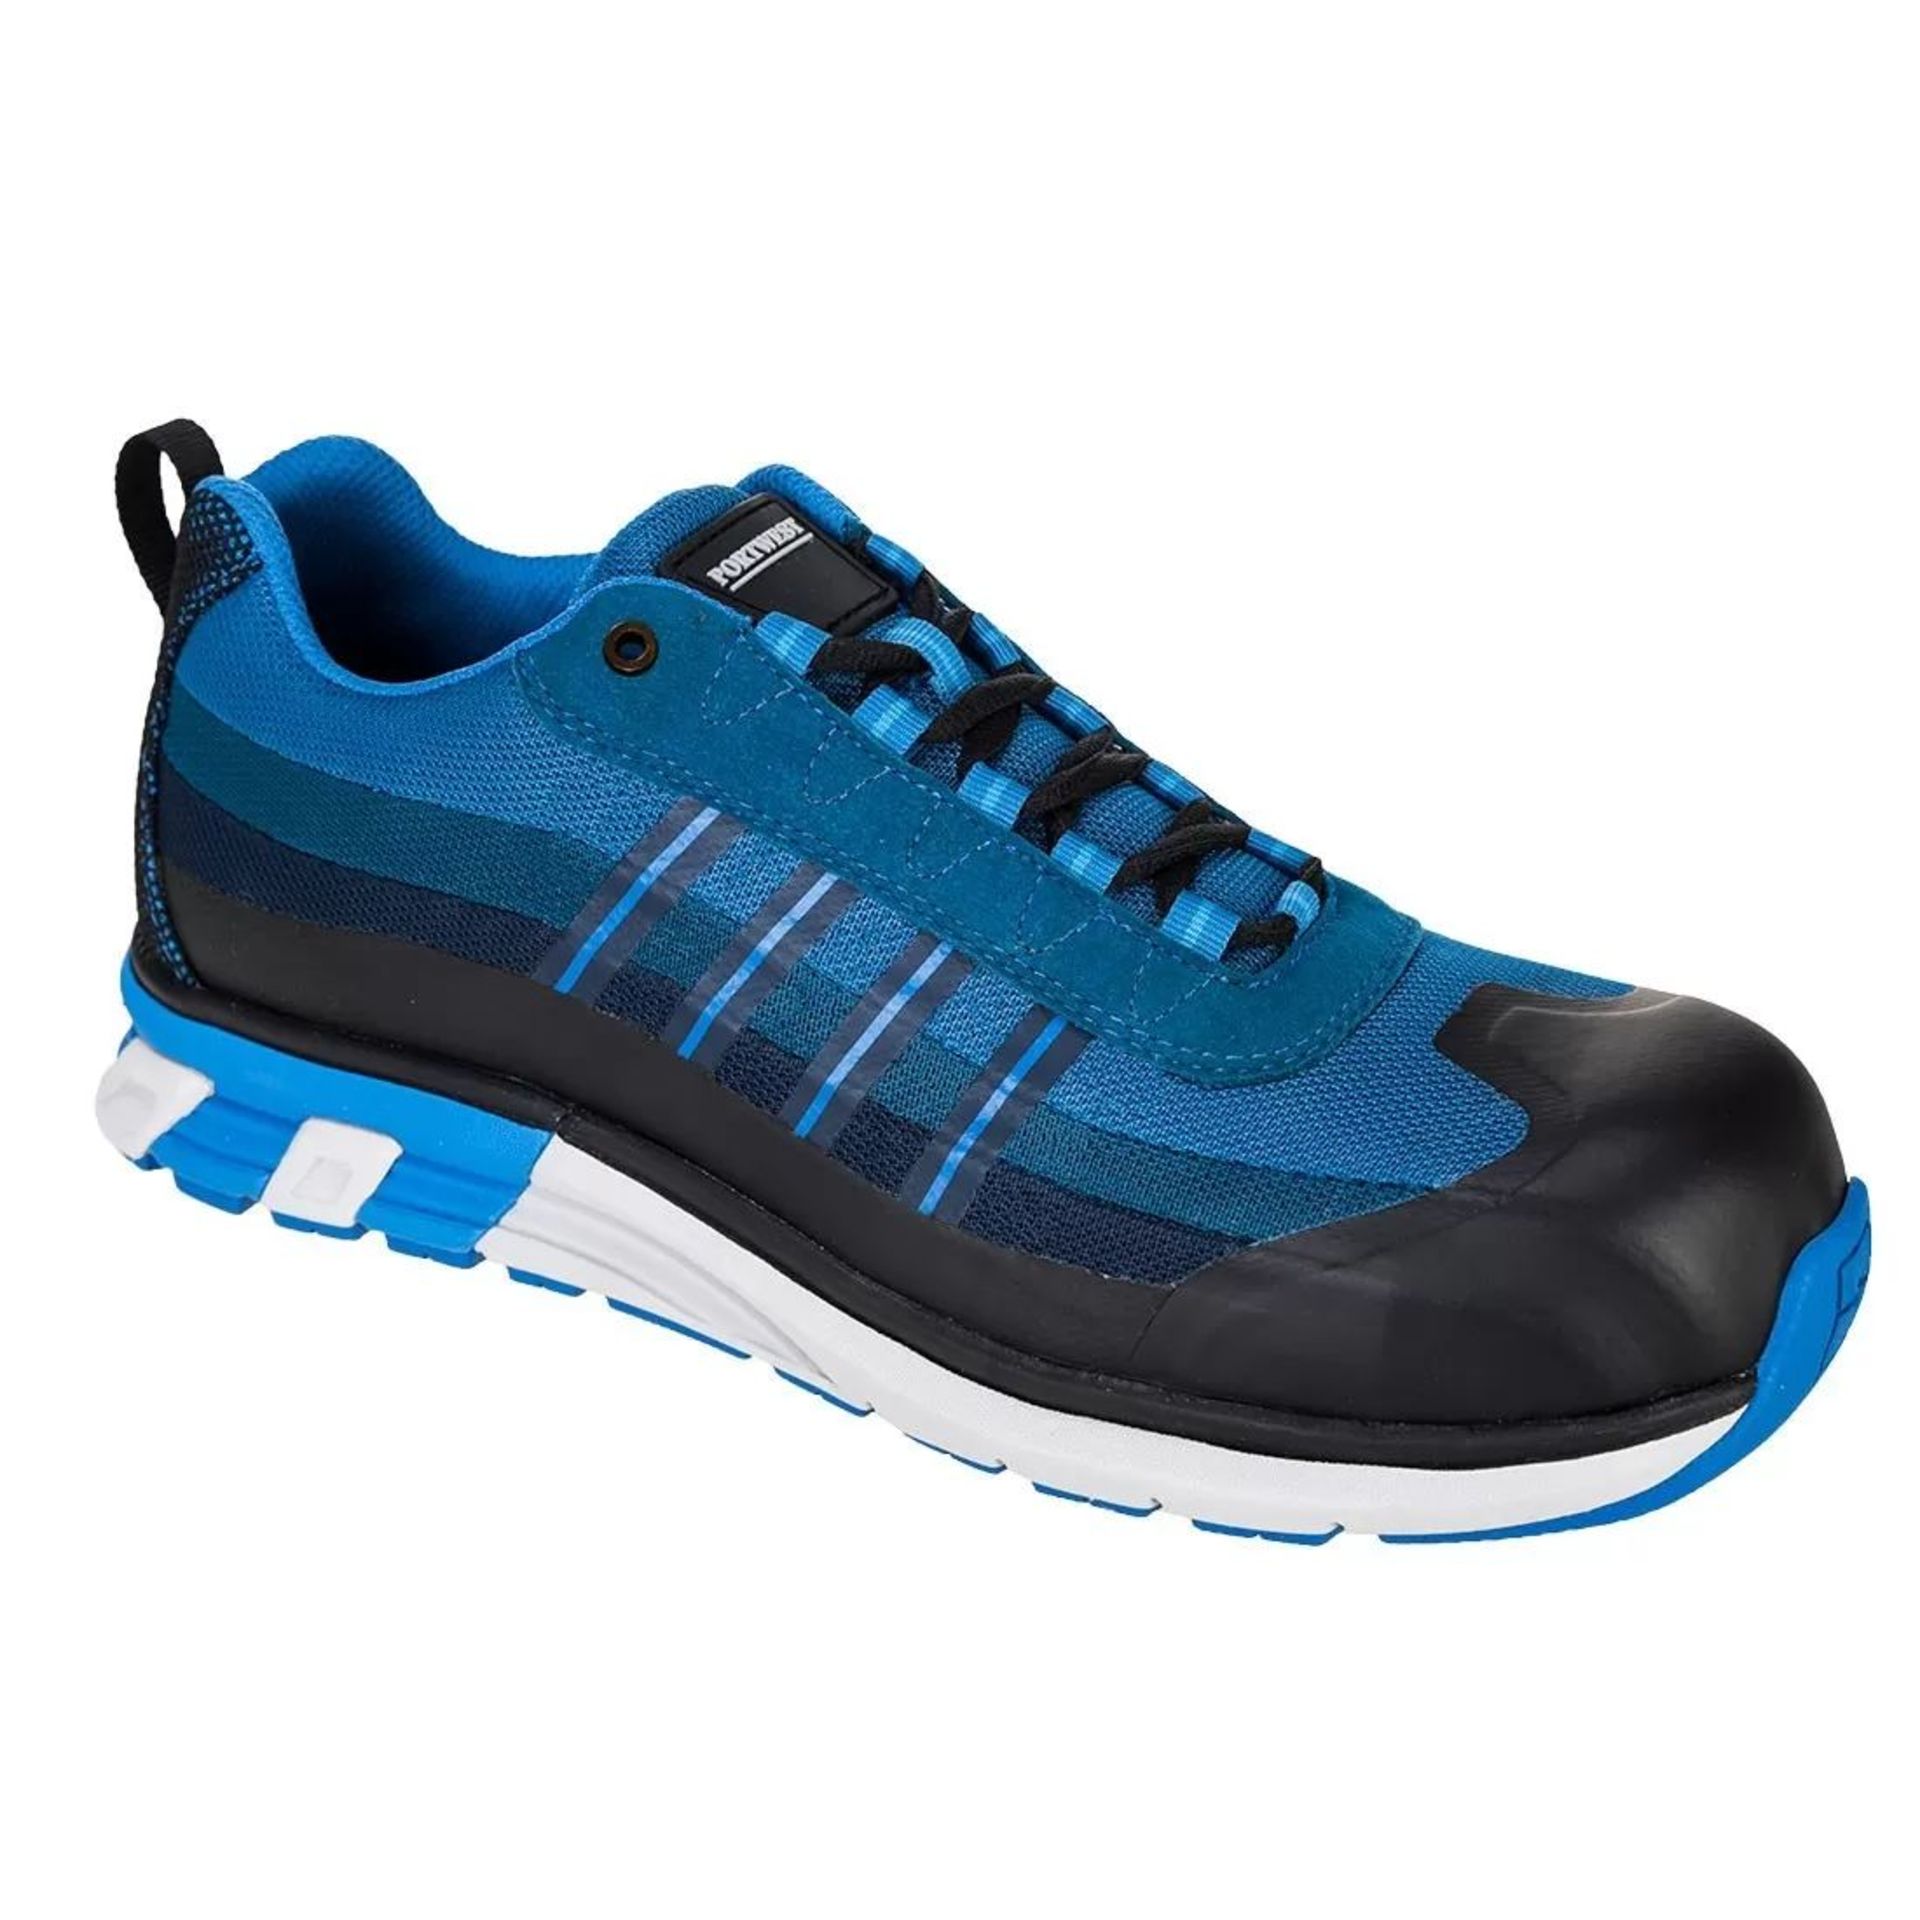 BRAND NEW PORTWEST FT16 OlymFlex London SBP AE Trainer BLUE SIZE 6.5. RRP £45. (PW). (FT16BBR40).